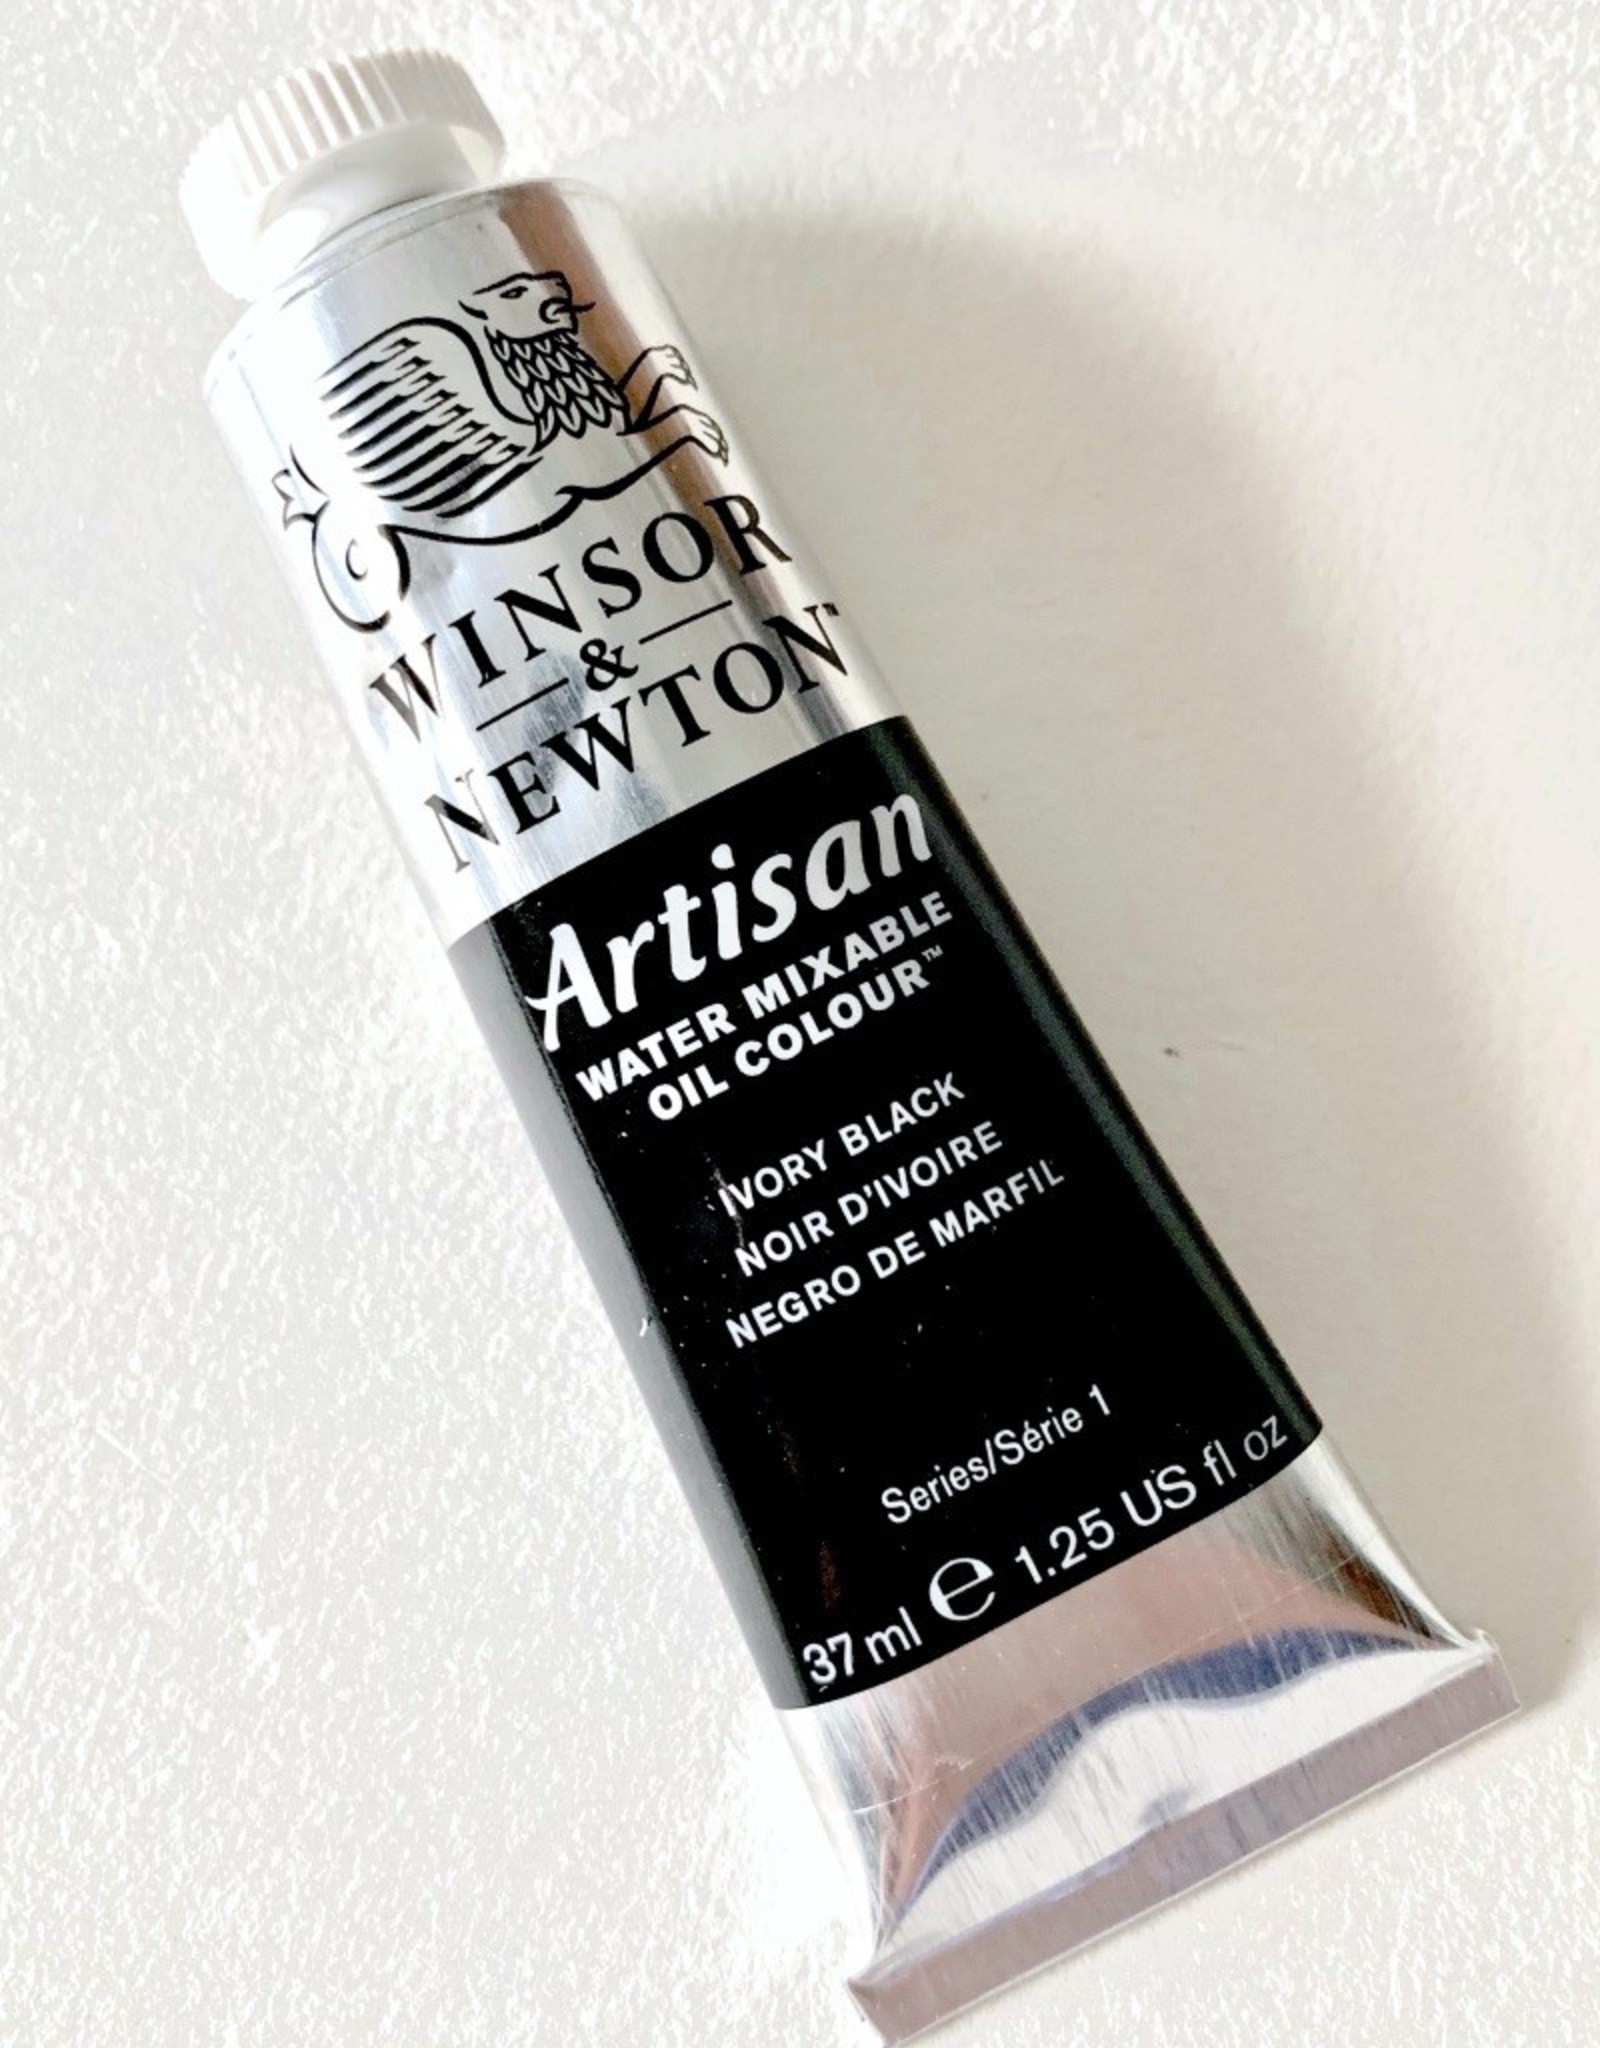 Winsor & Newton Artisan Water Mixable Oil Paint, Ivory Black, 37ml